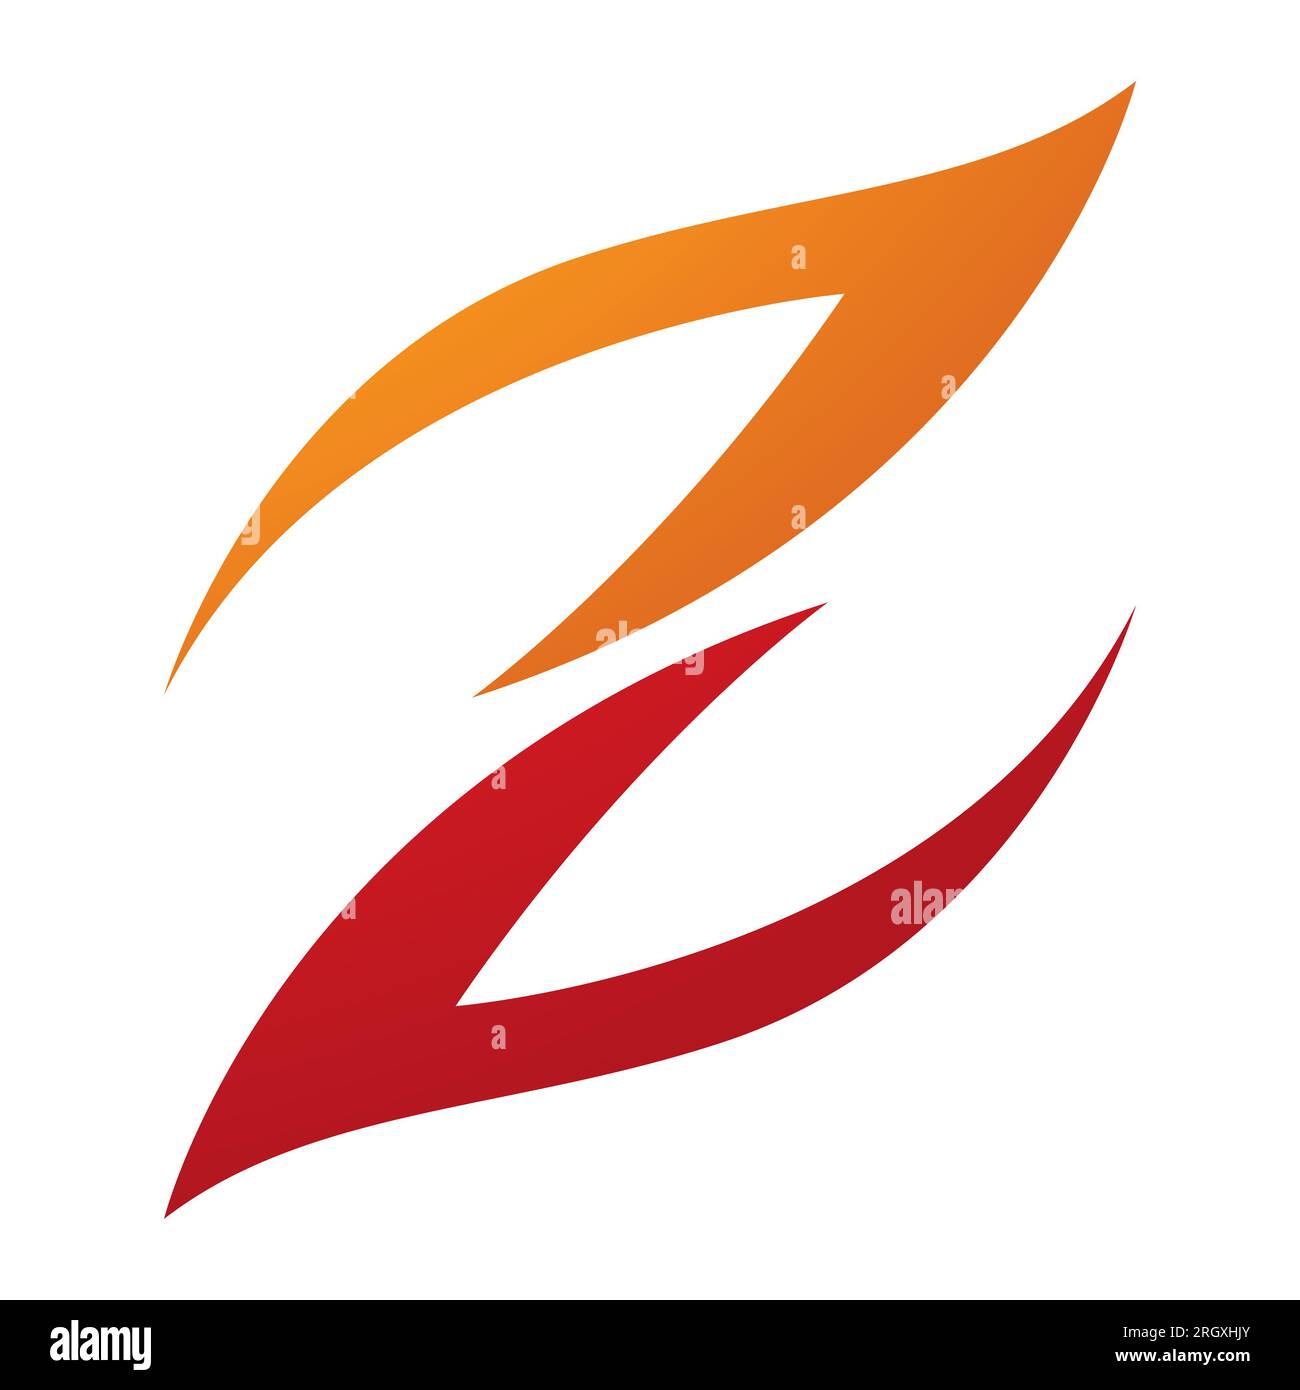 Orange and Red Fire Shaped Letter Z Icon on a White Background Stock Photo